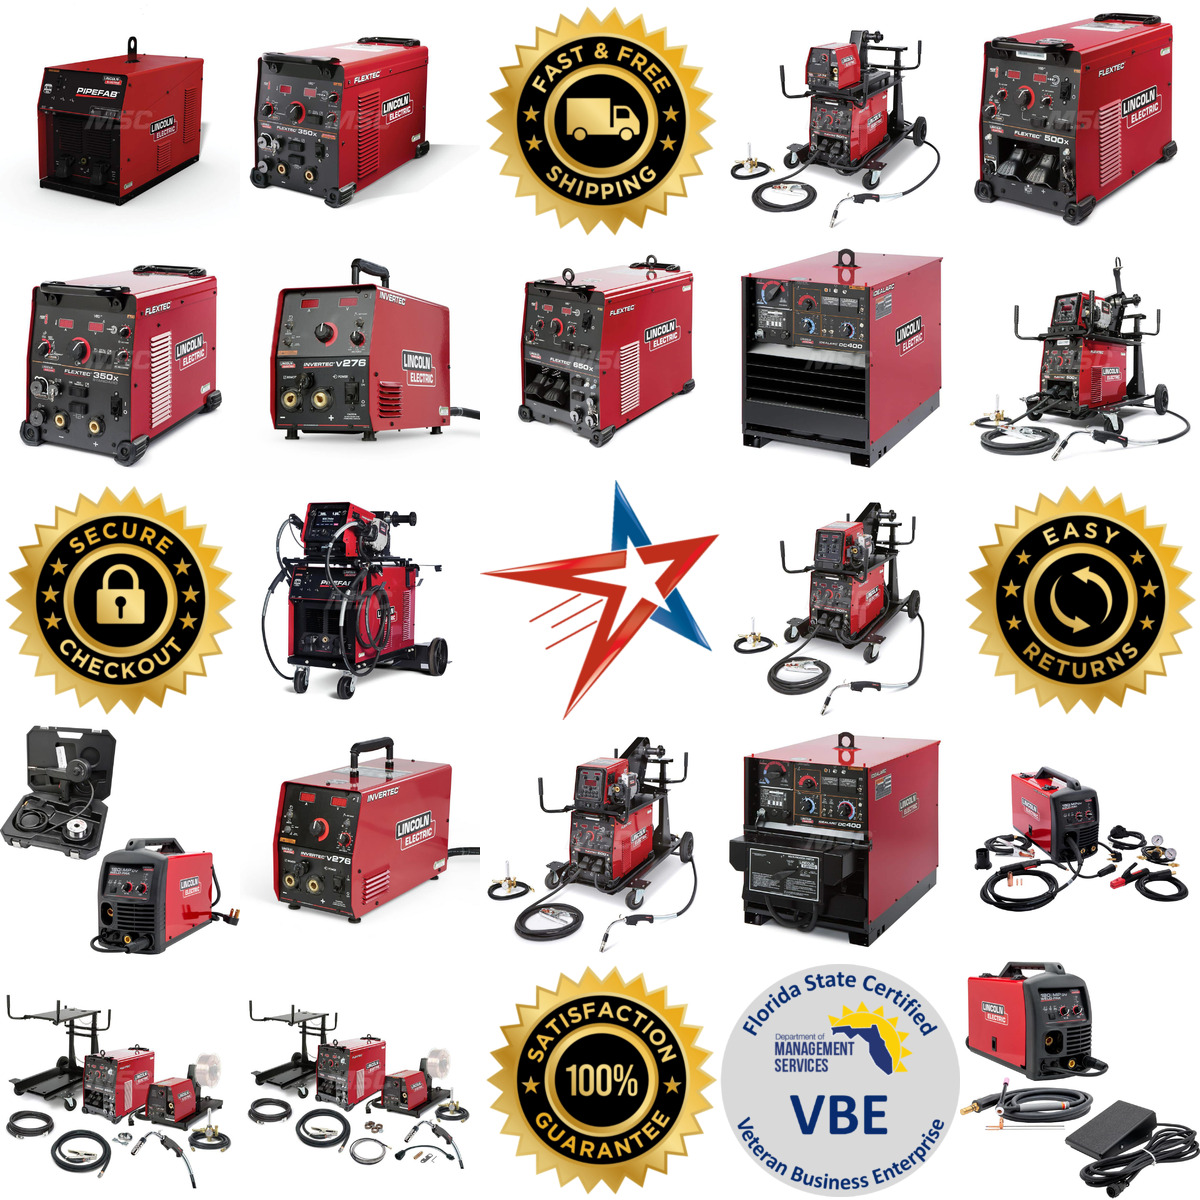 A selection of Multi Process Welding products on GoVets